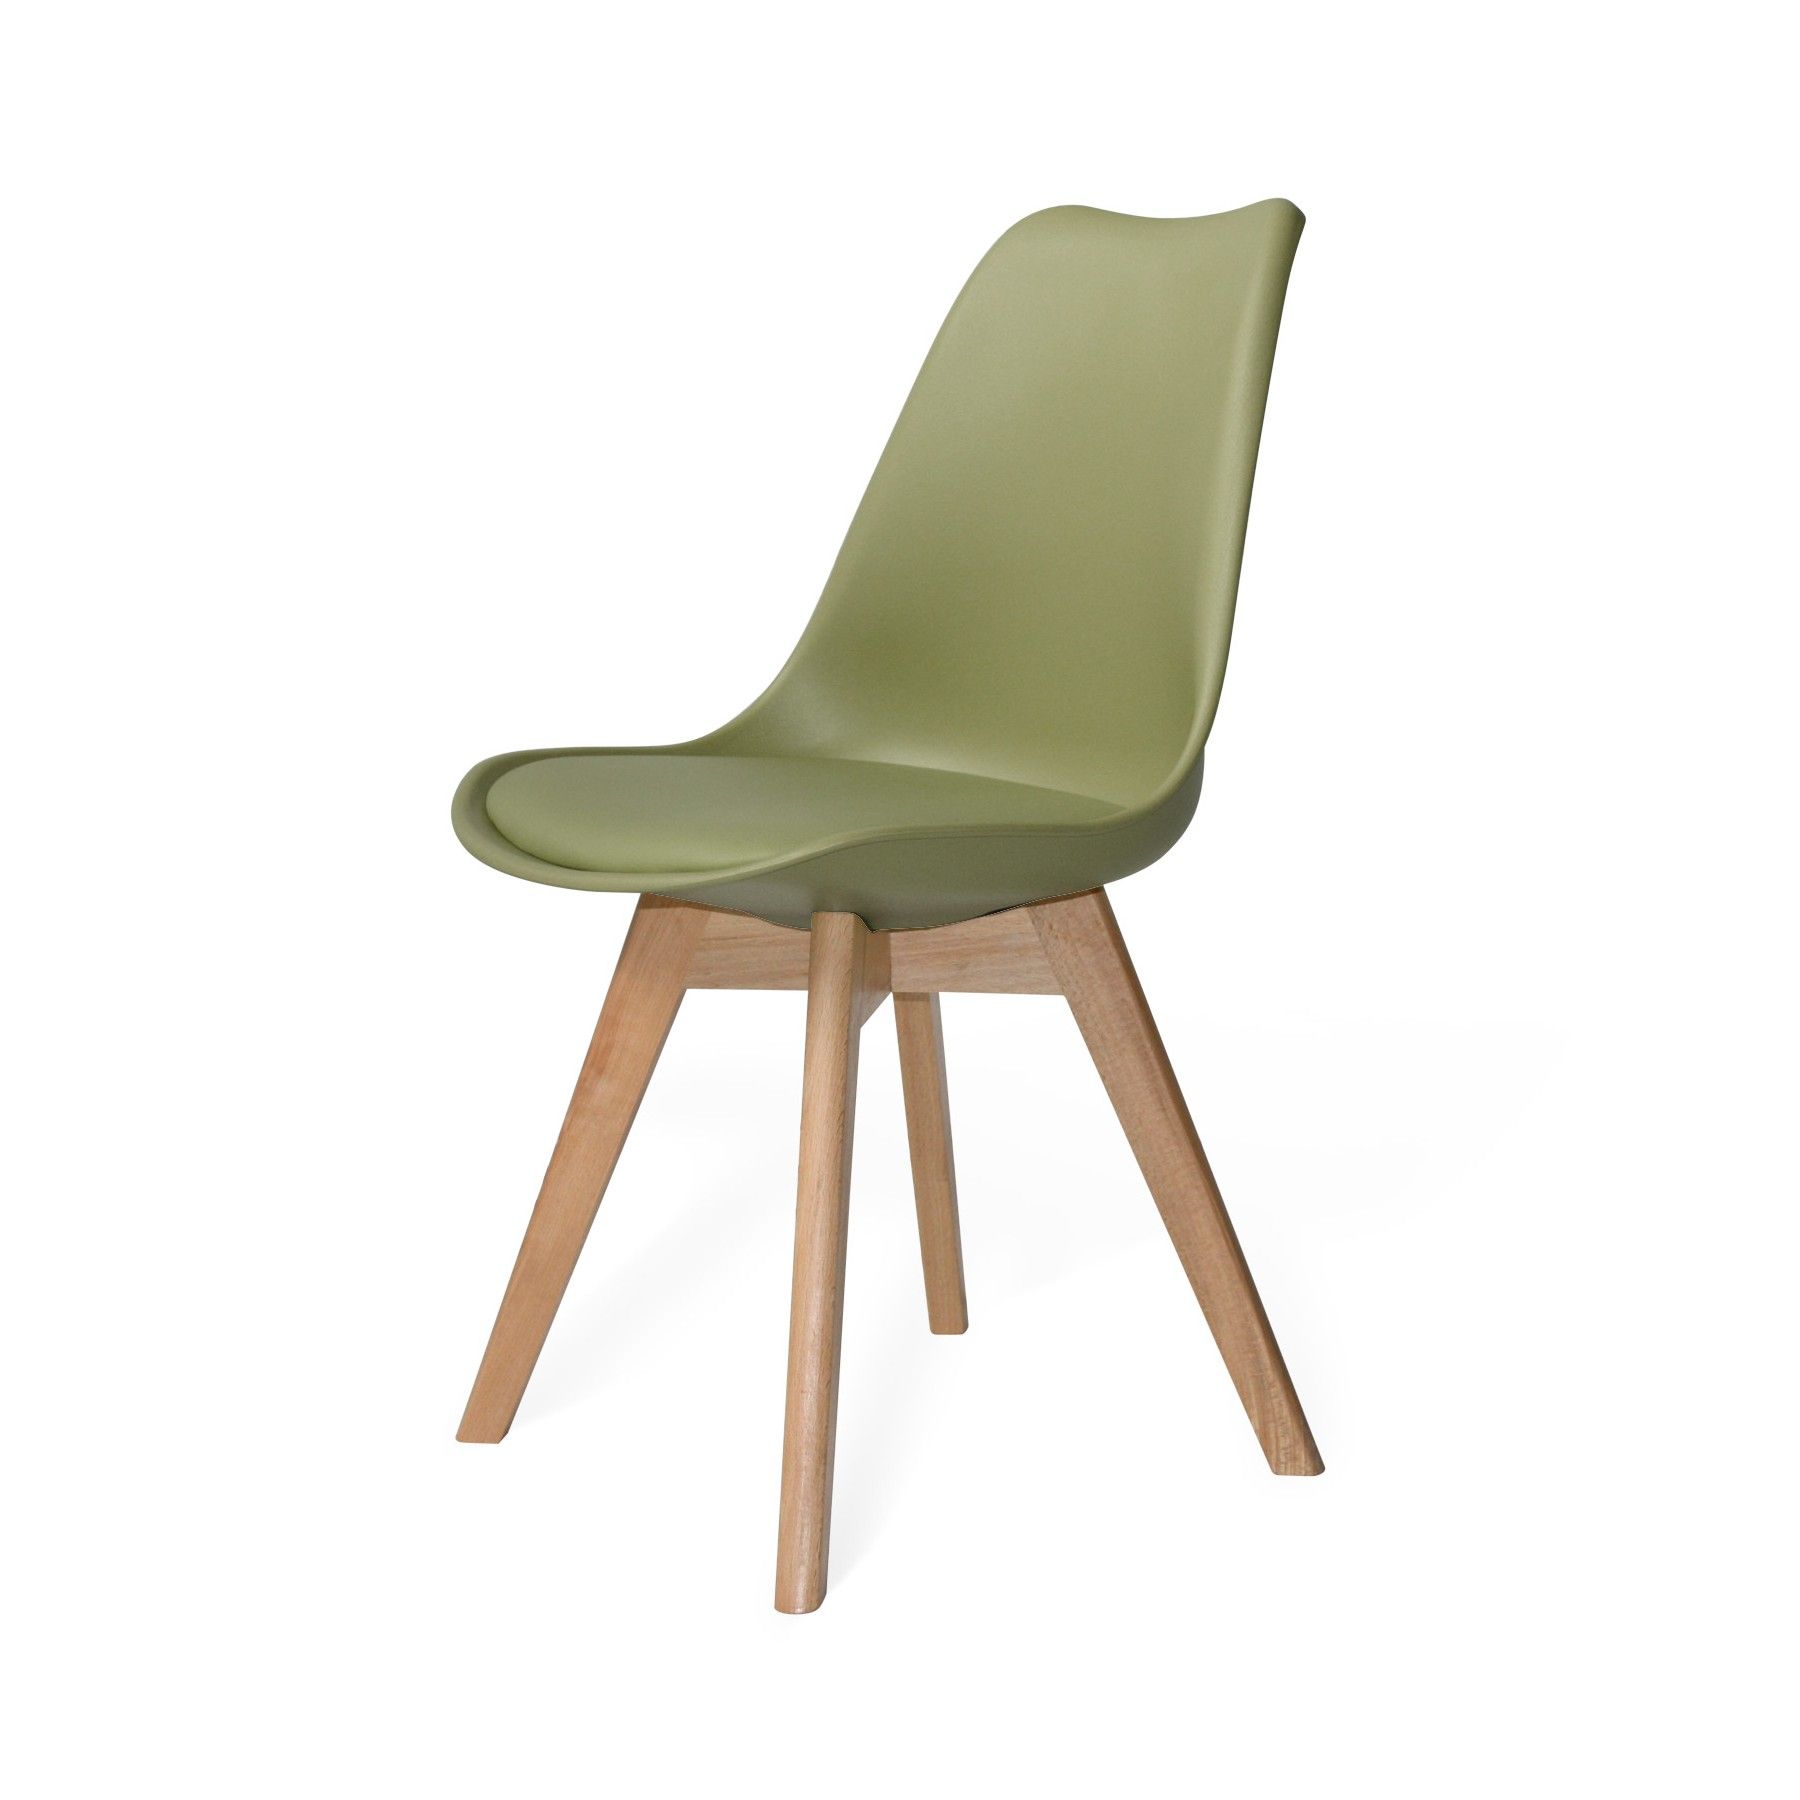 SILLA NEW TOWER WOOD VERDE